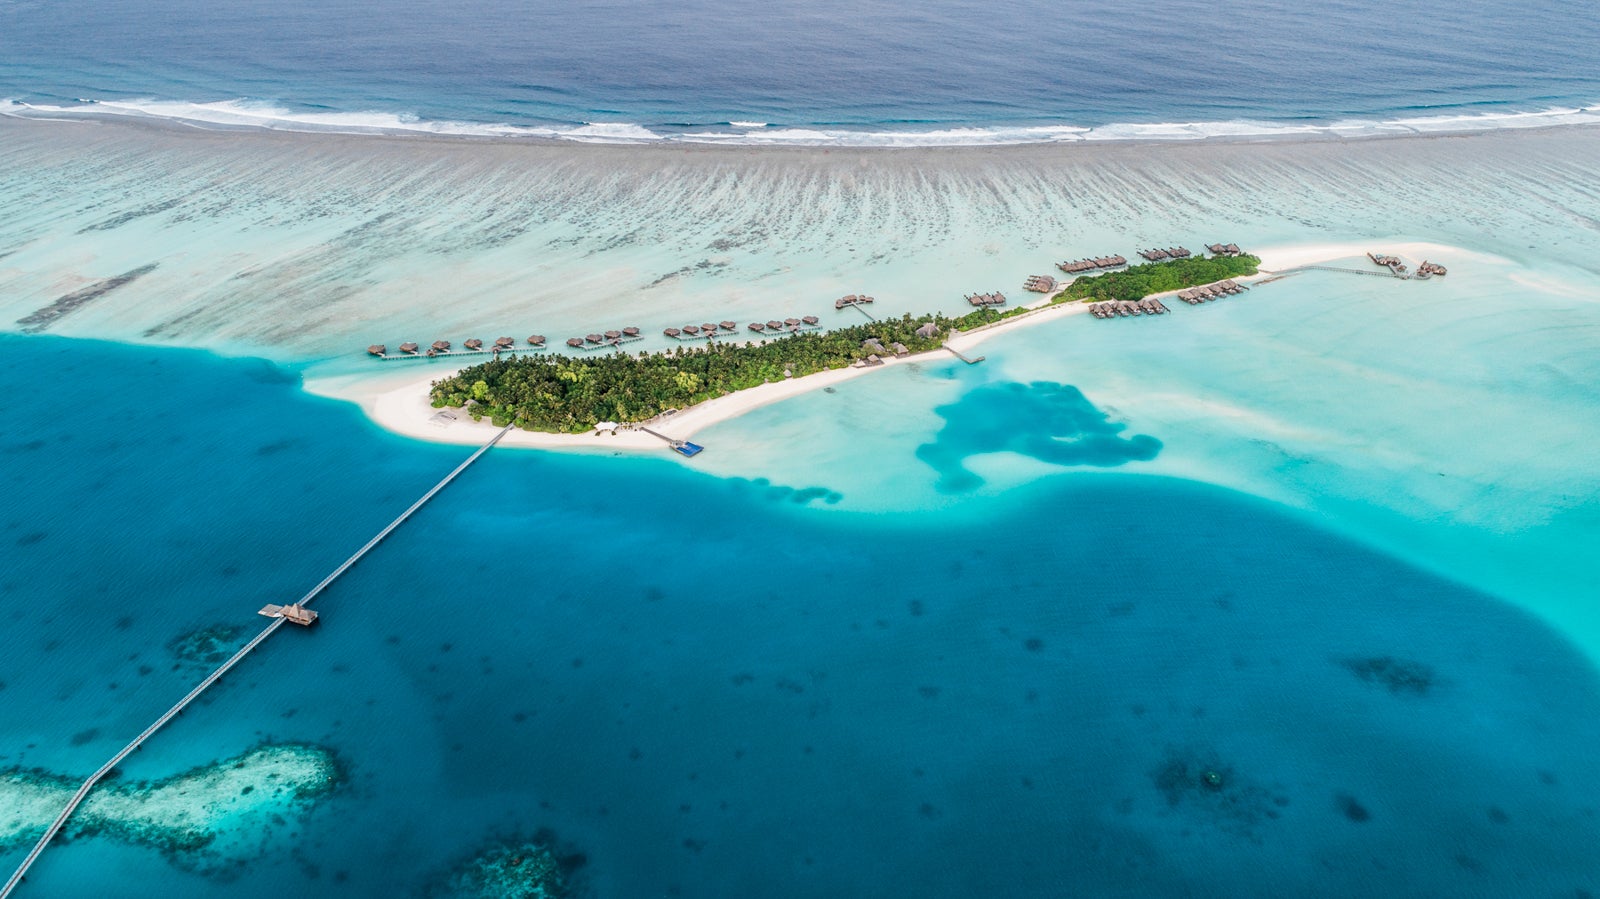 Aerial shot of an island in the Maldives